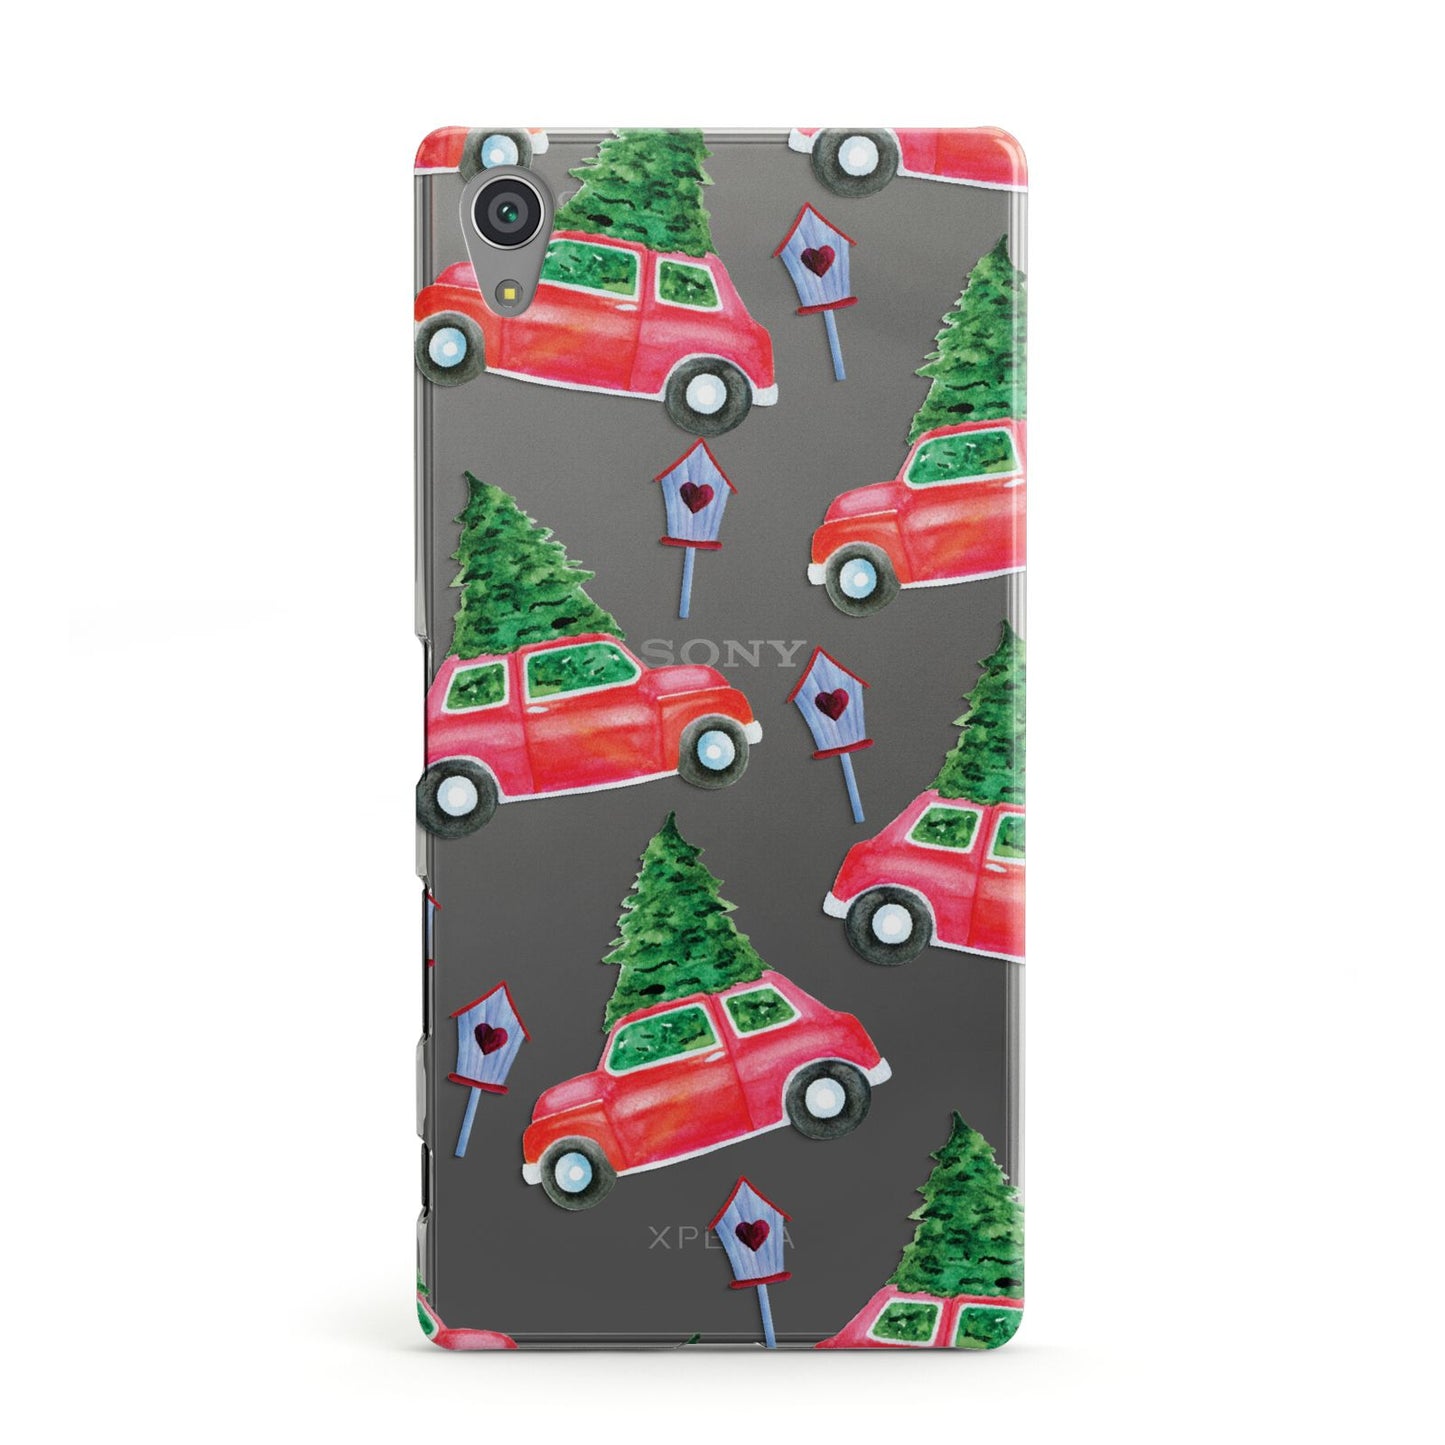 Driving home for Christmas Sony Xperia Case